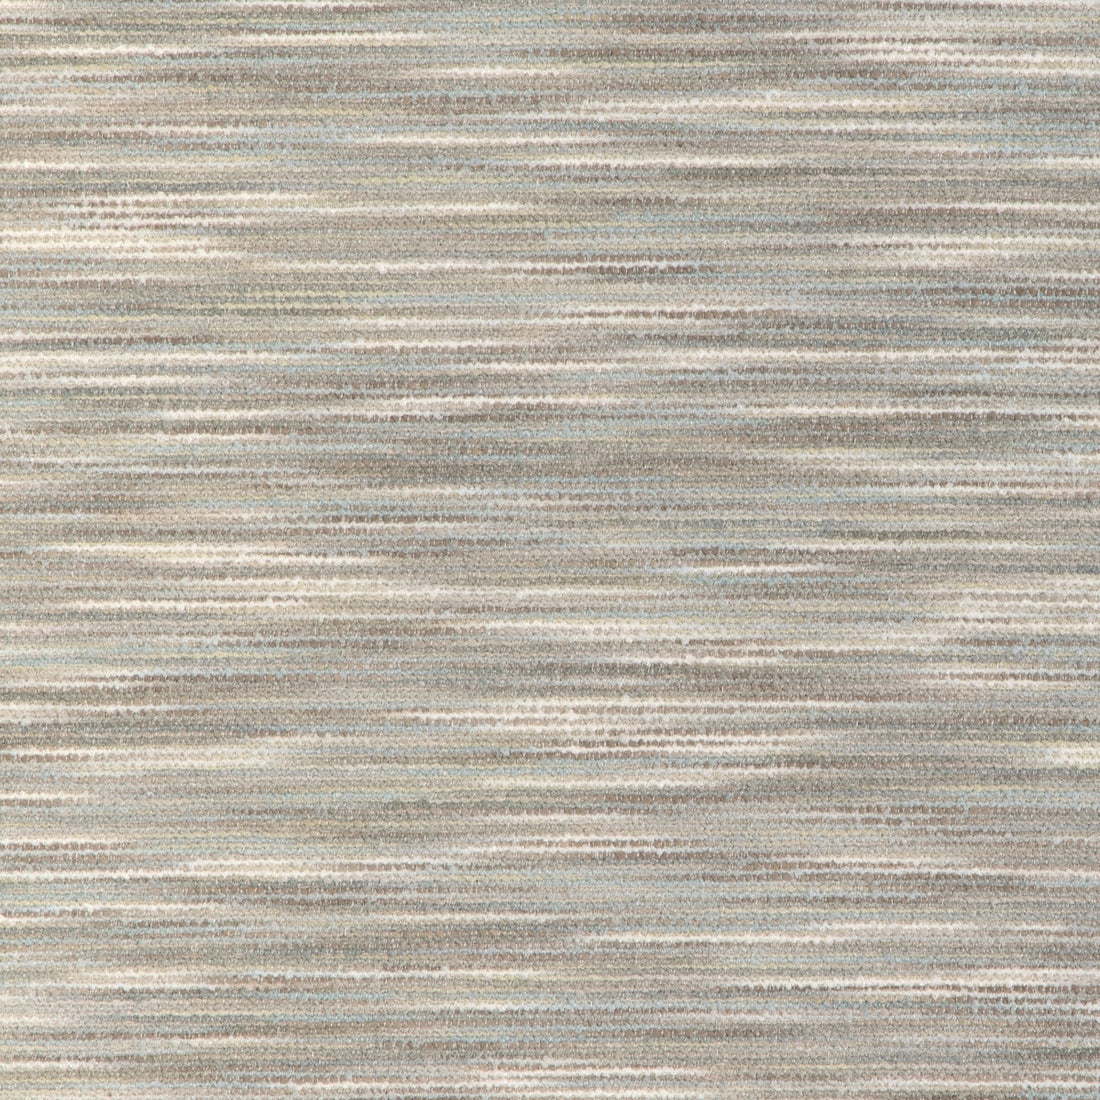 Kravet Design fabric in 36975-1635 color - pattern 36975.1635.0 - by Kravet Design in the Sustainable Textures II collection